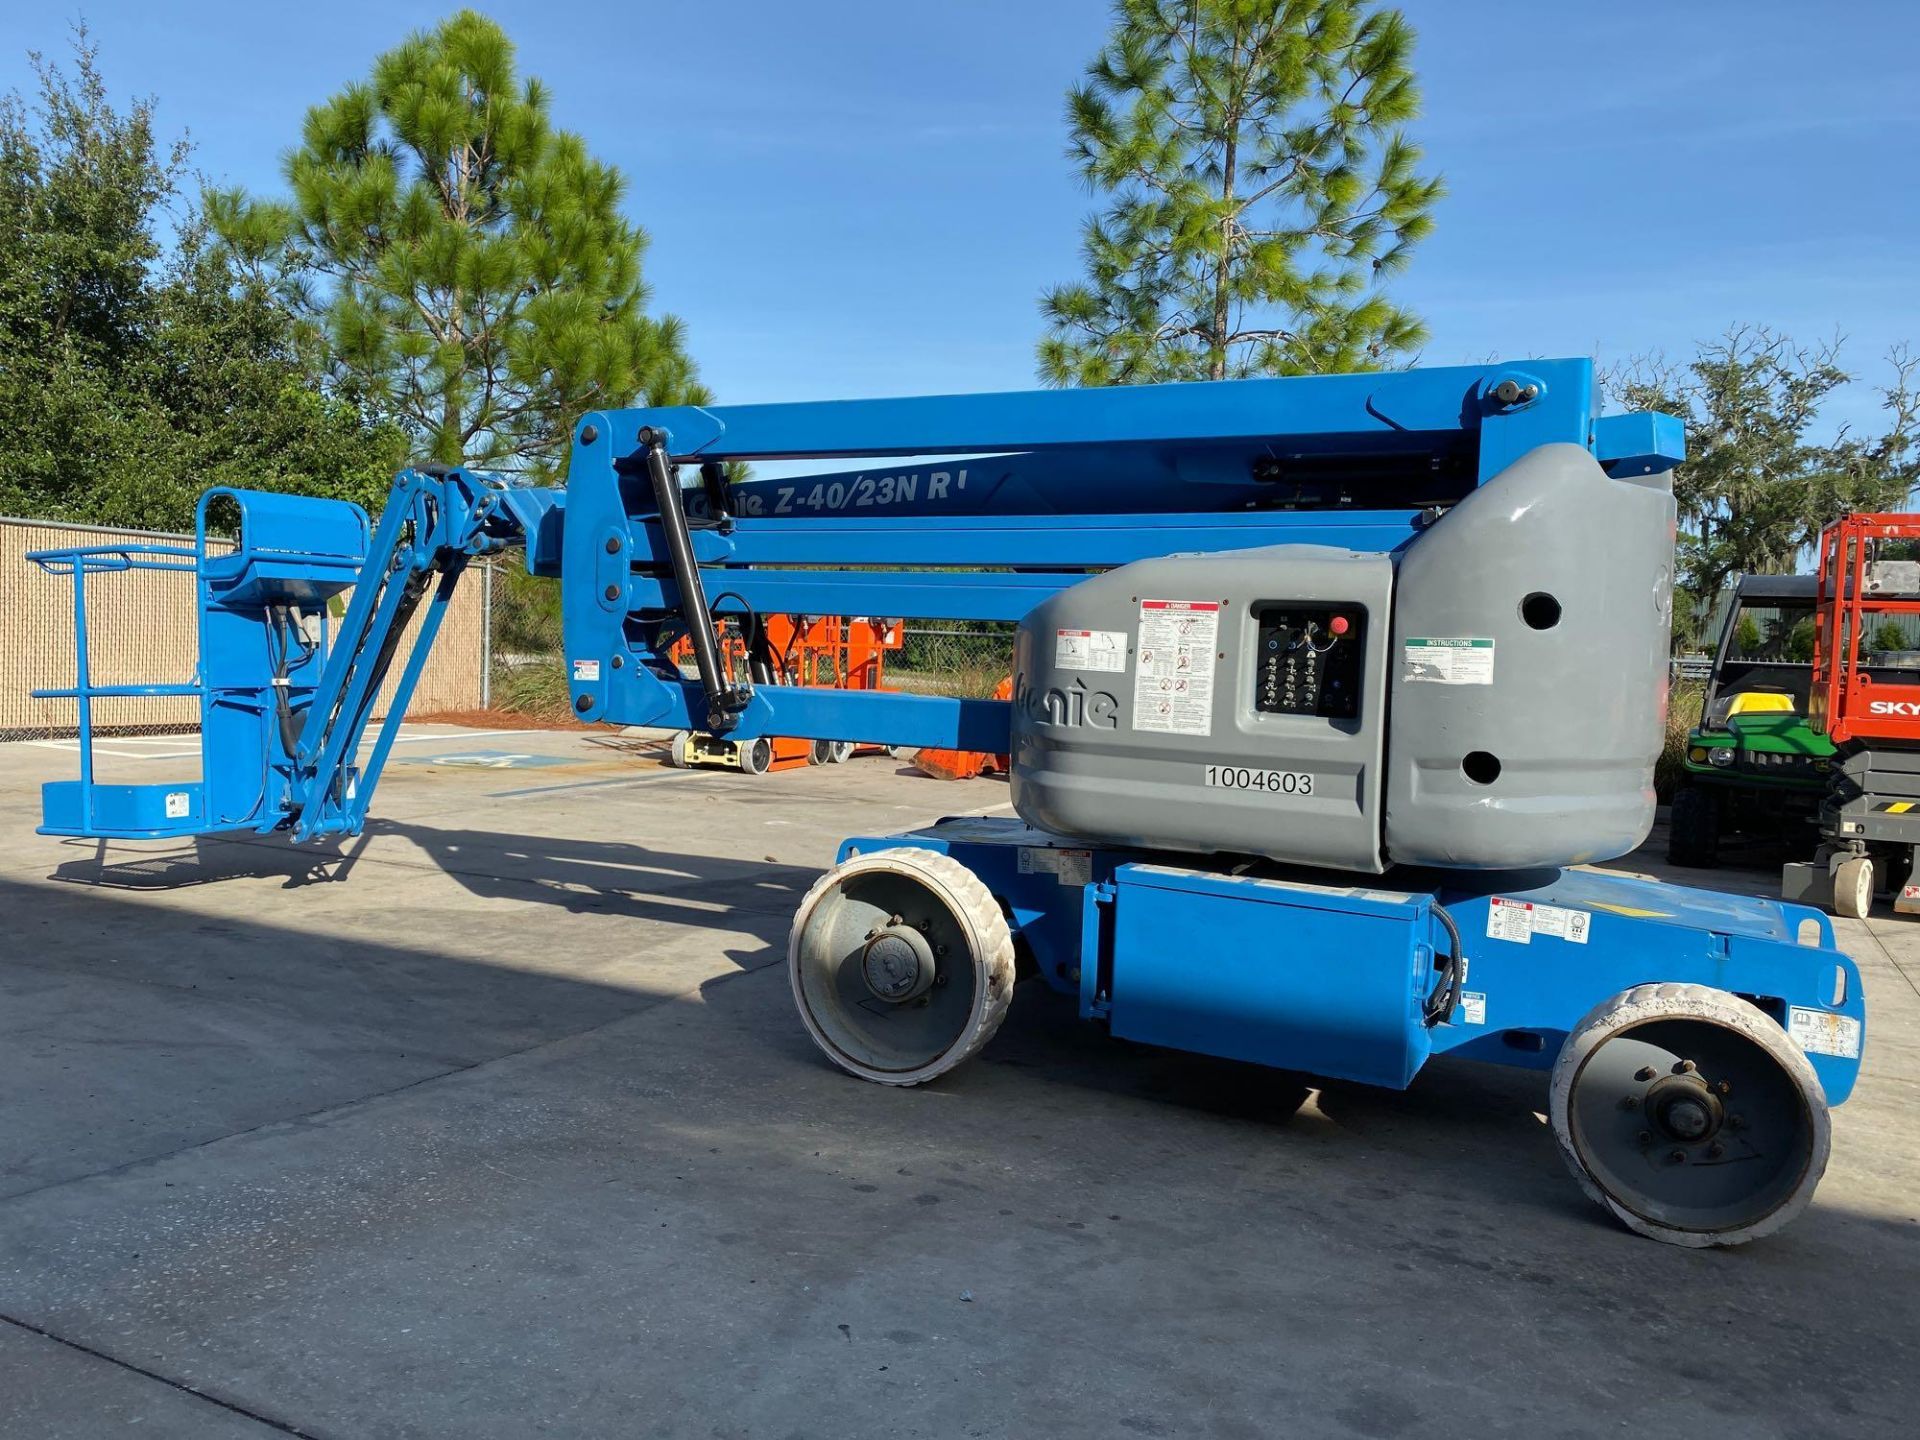 GENIE ELECTRIC BOOM LIFT MODEL Z-40/23N RJ, 40' PLATFORM HEIGHT, RUNS AND OPERATES - Image 2 of 8